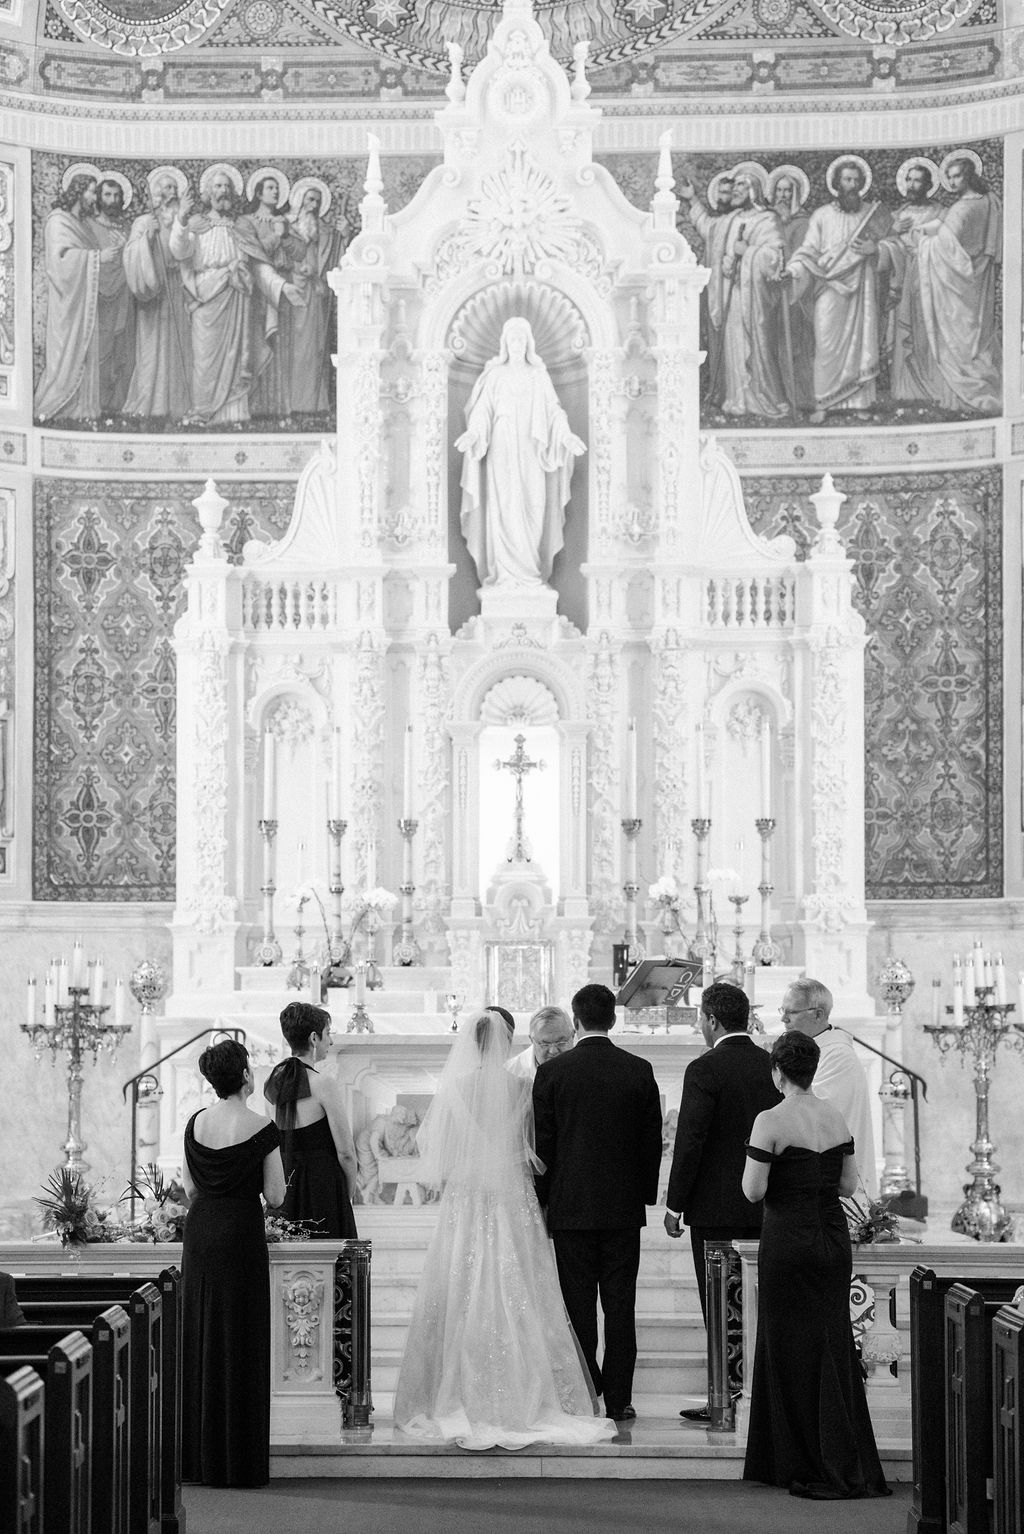 wedding party at the alter in St Edward's church Palm Beach